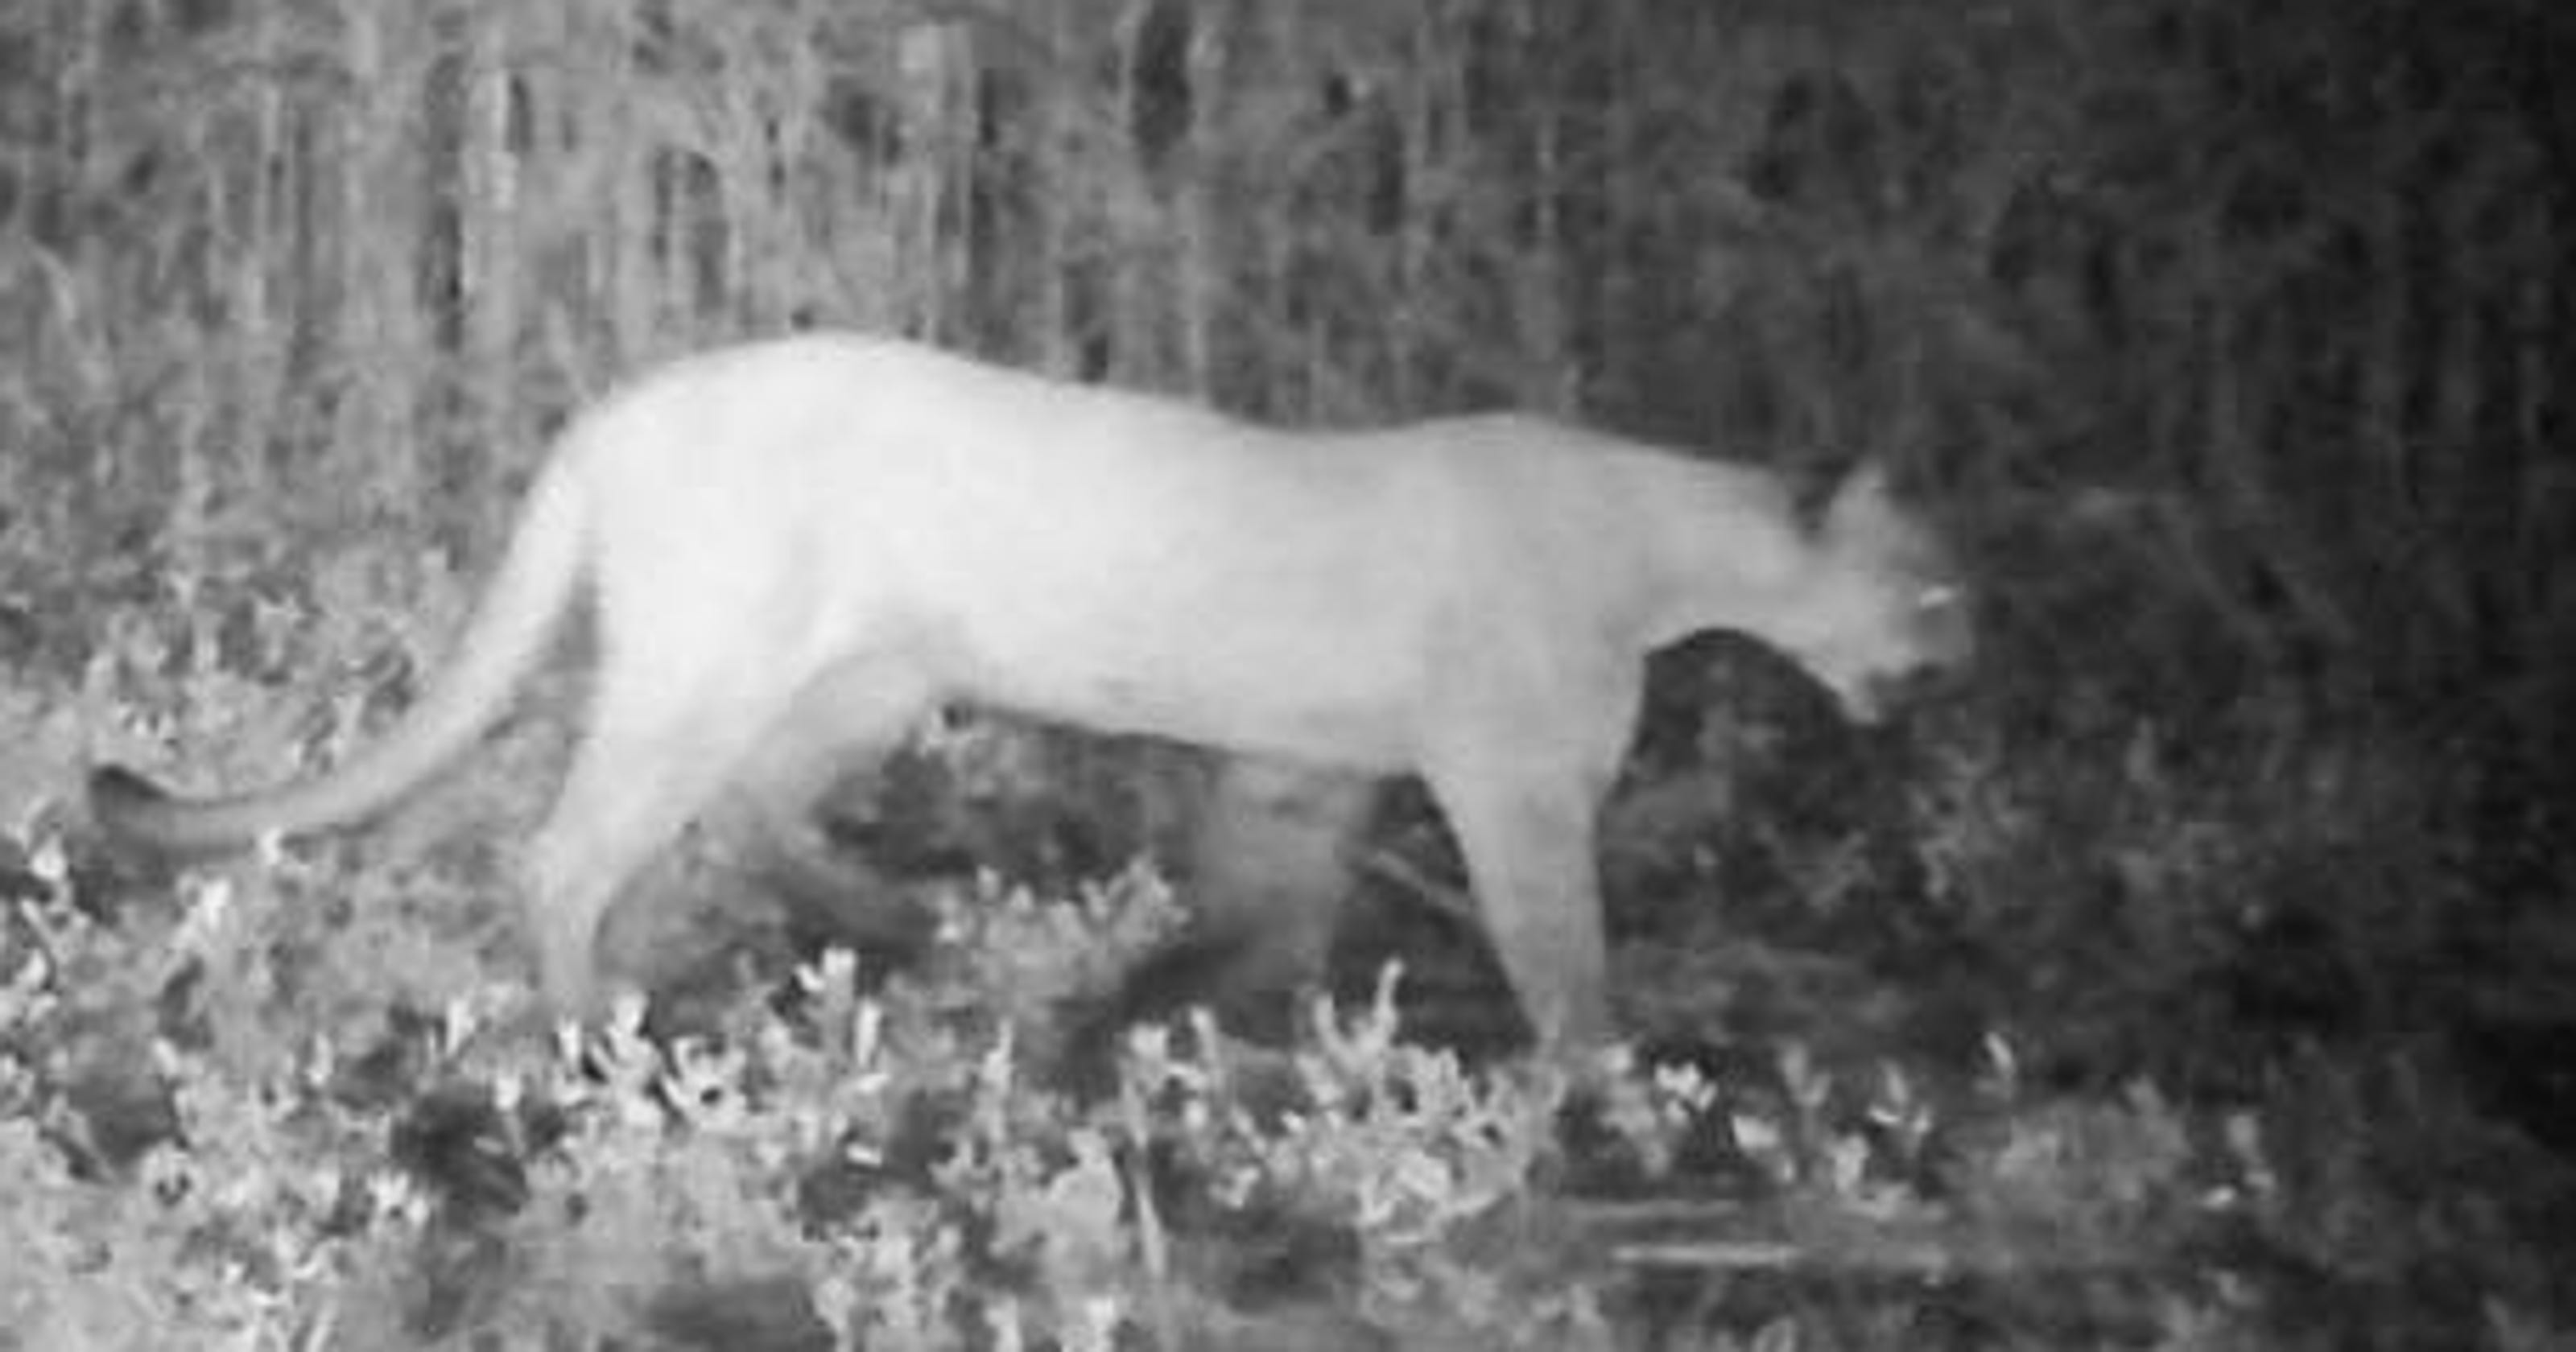 Mountain lion spotted in Iowa